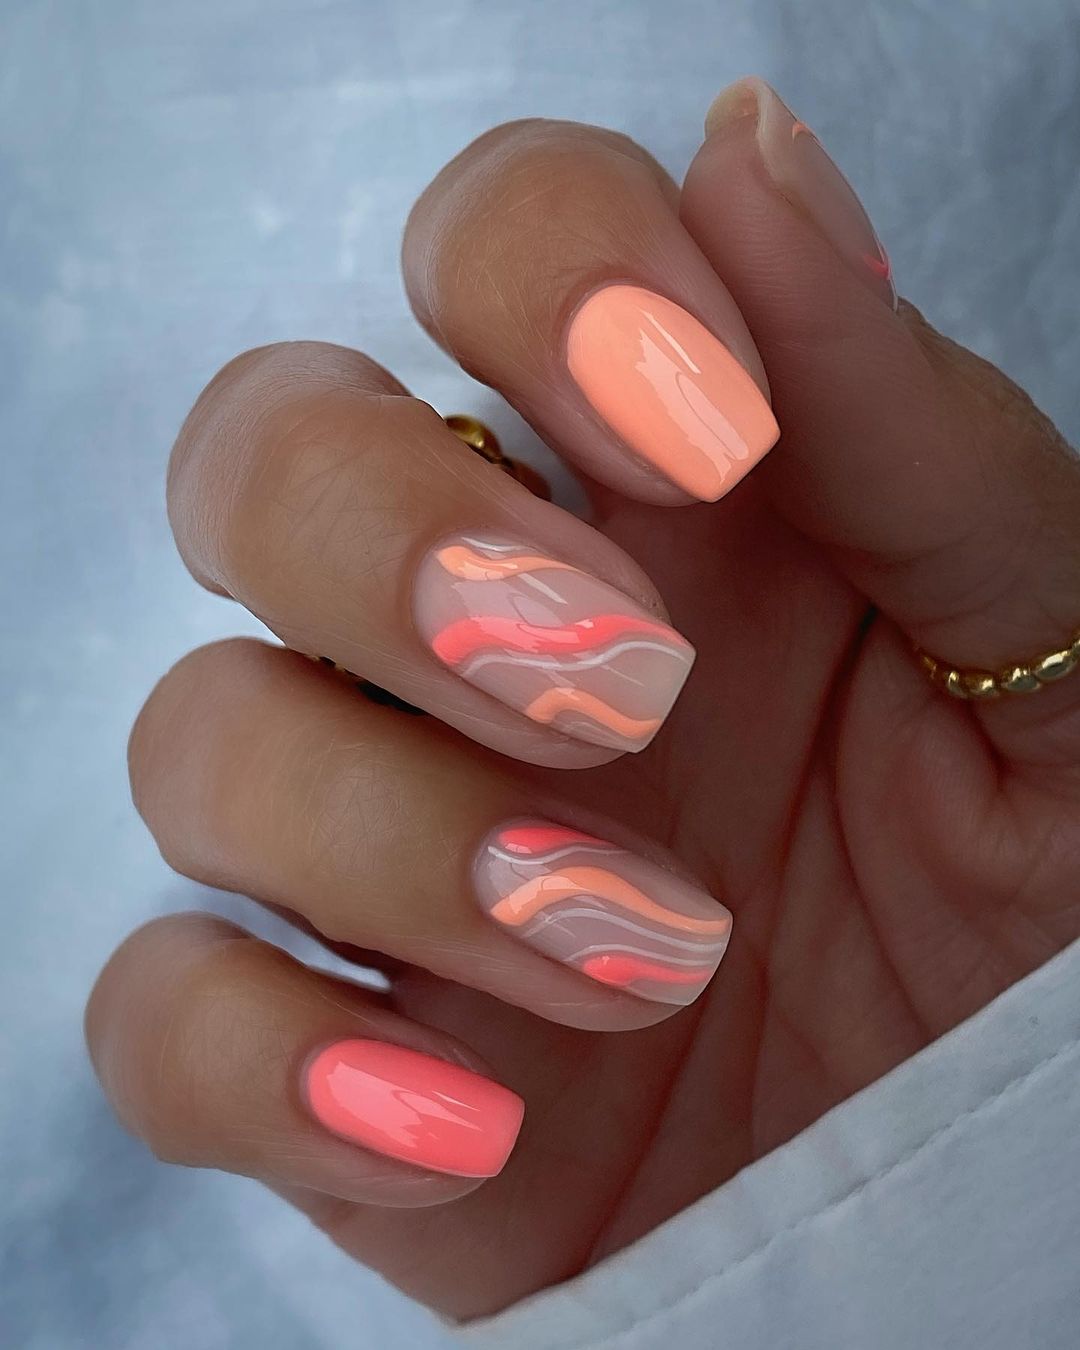 Glowing Glamour: 25 Neon Coral Nails Ideas to Brighten Your Look